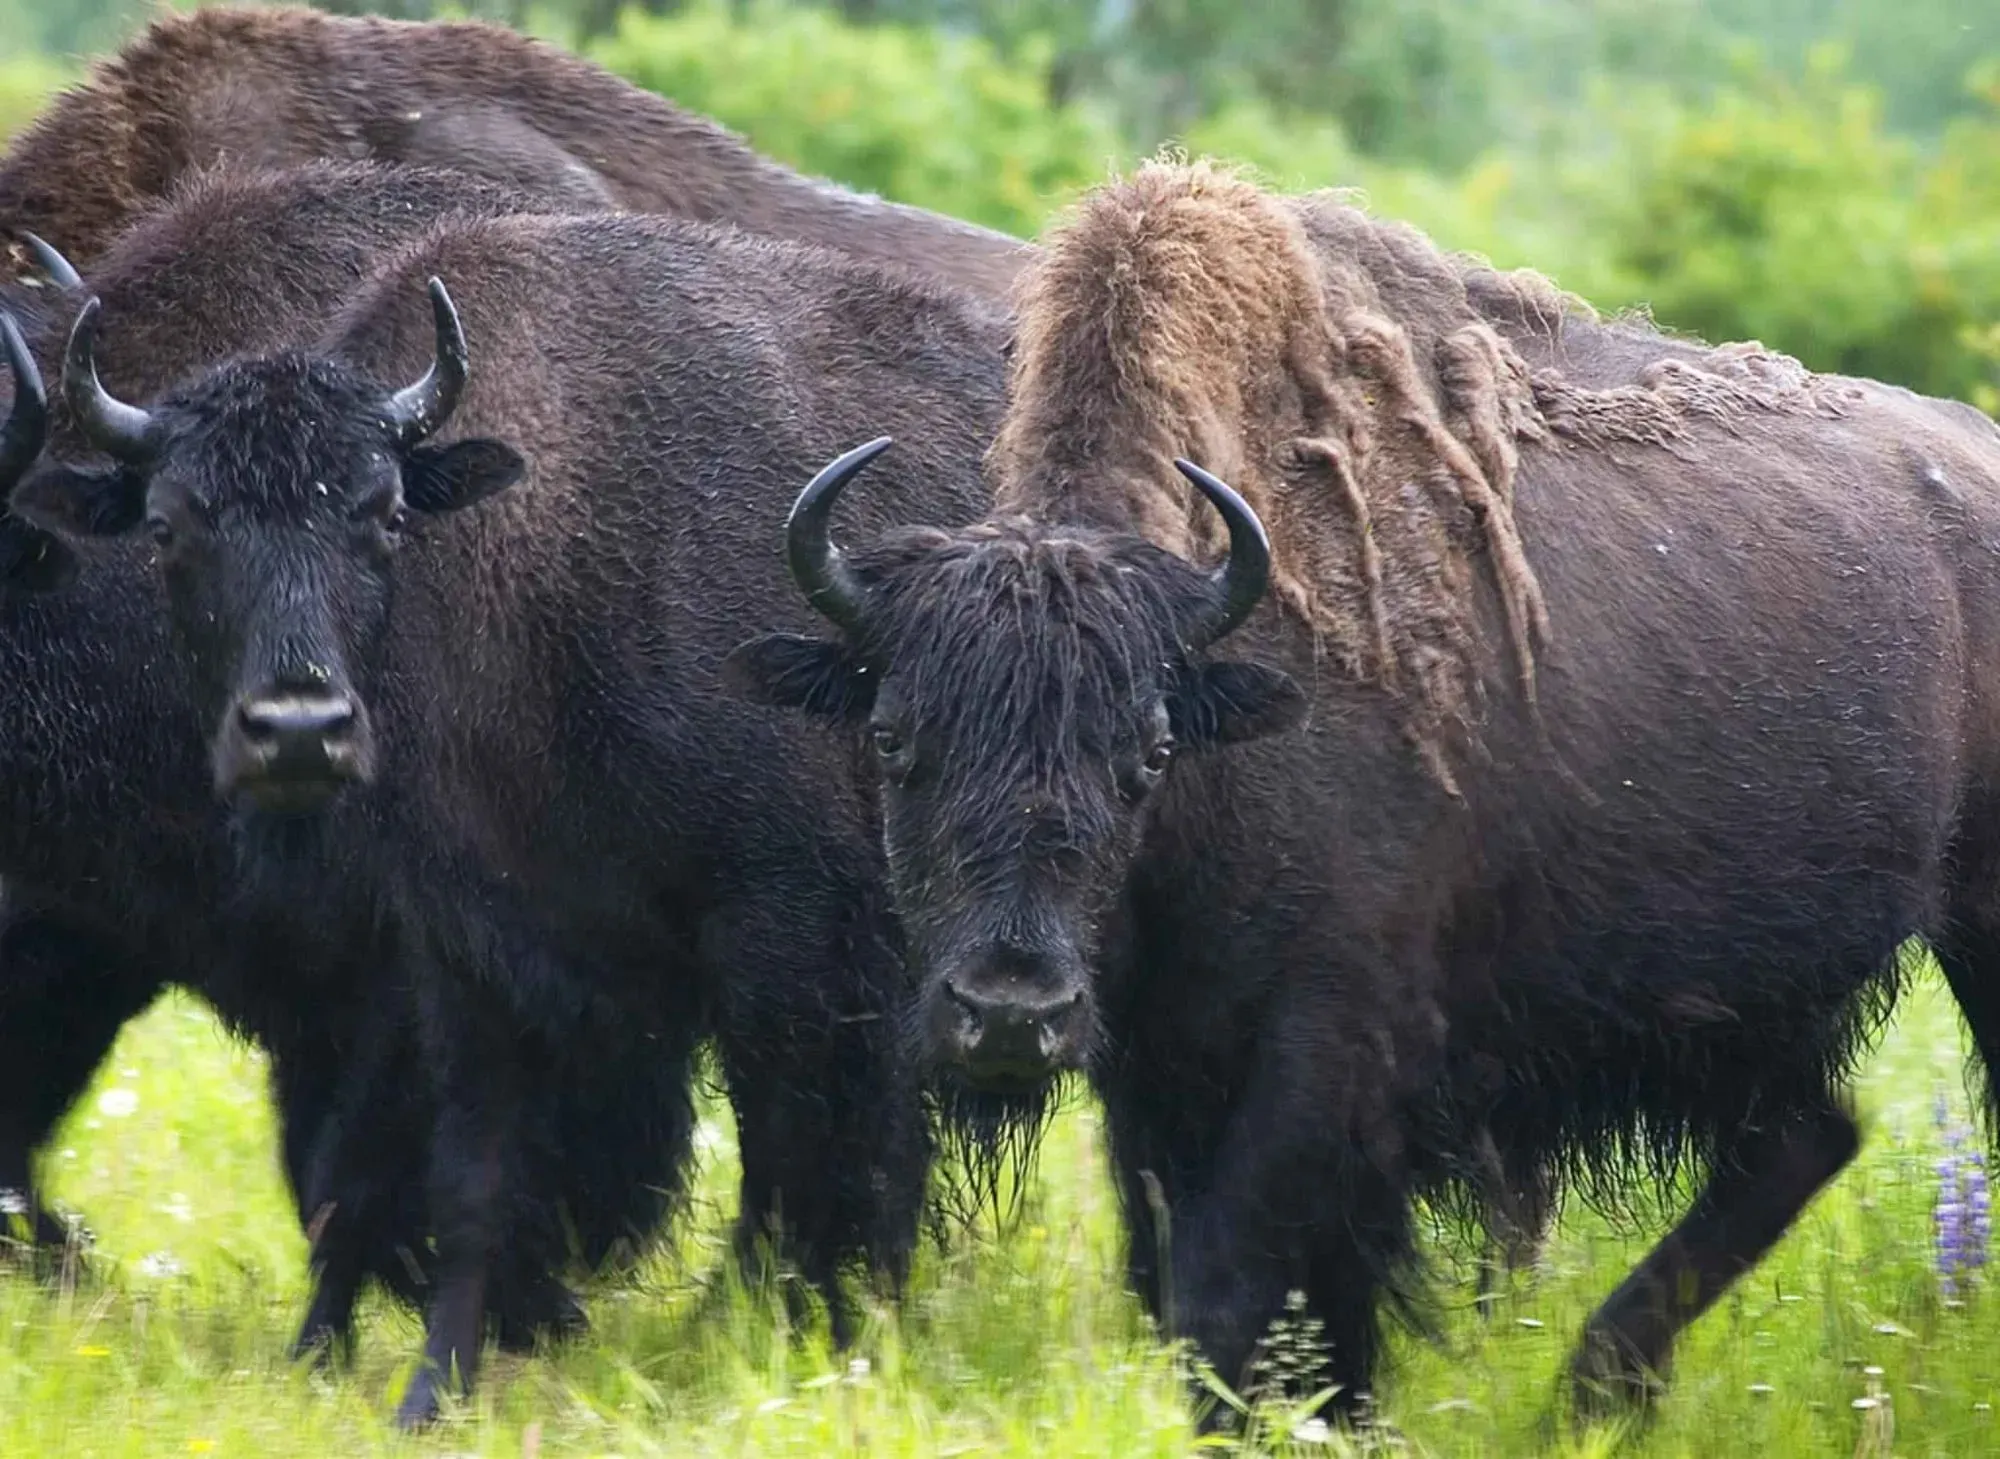 Wood bison can suffer from a disease like tuberculosis.